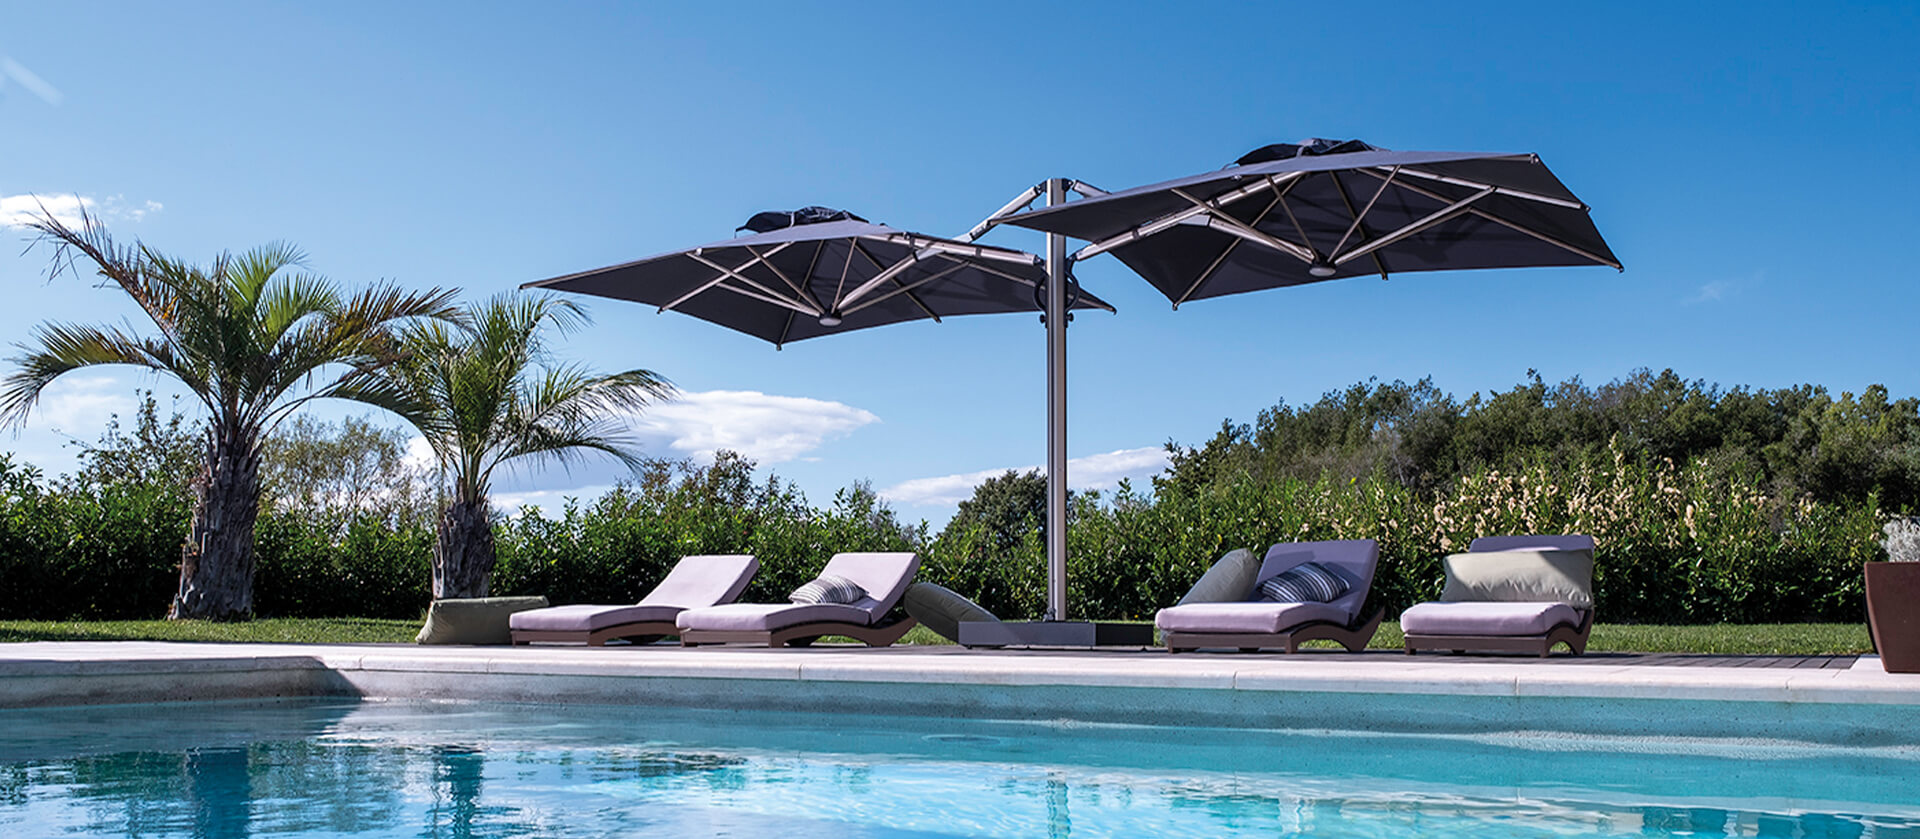 Parasols-umbrellas with innovative gas spring assisted opening system